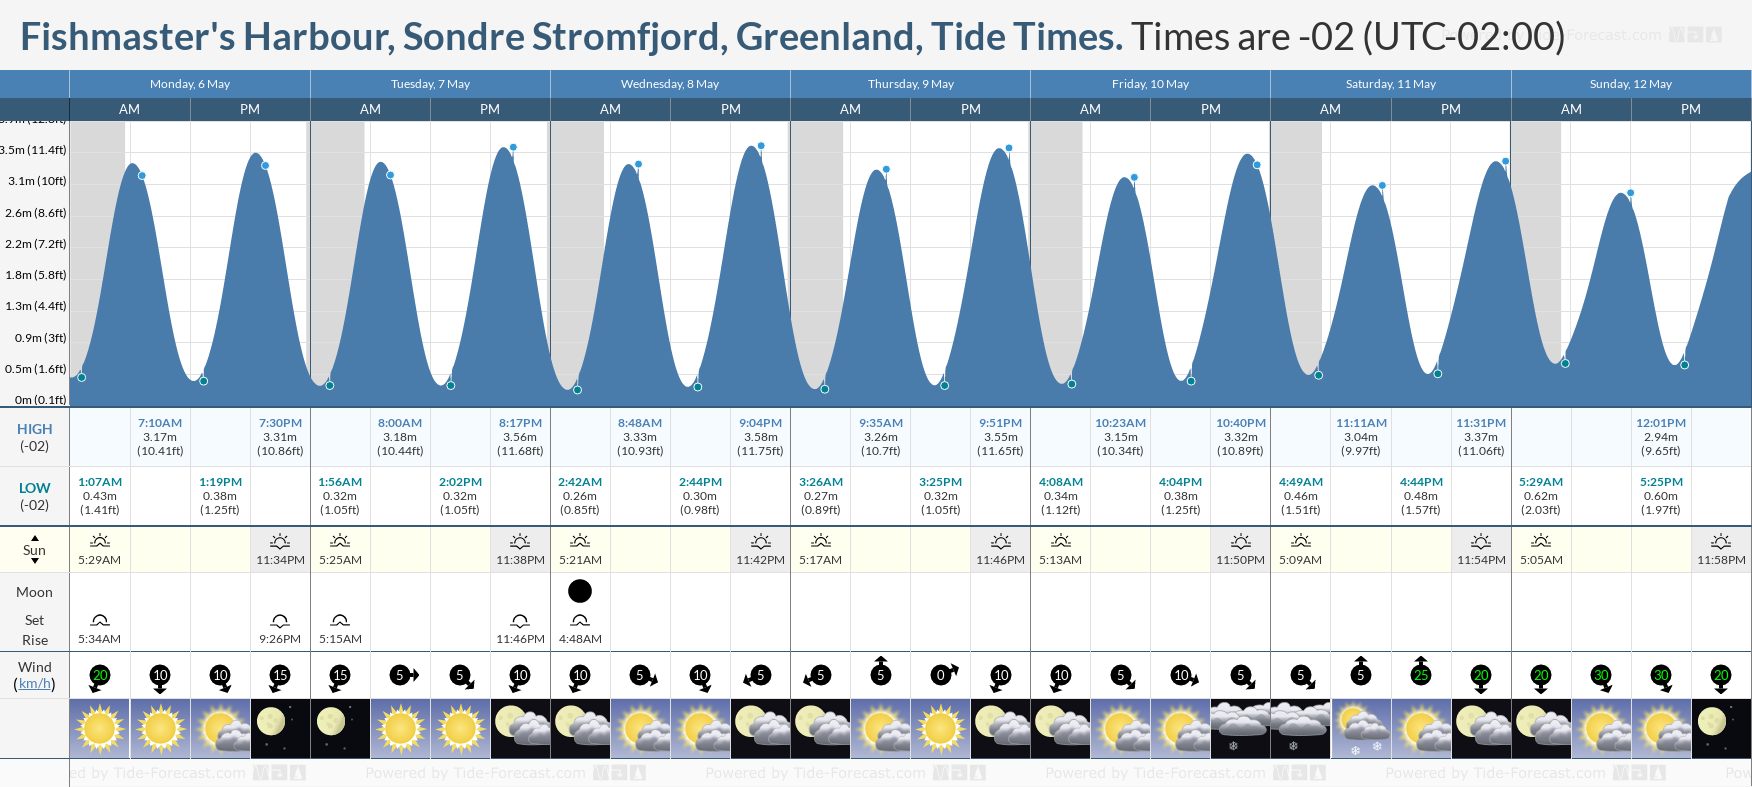 Fishmaster's Harbour, Sondre Stromfjord, Greenland Tide Chart including high and low tide tide times for the next 7 days